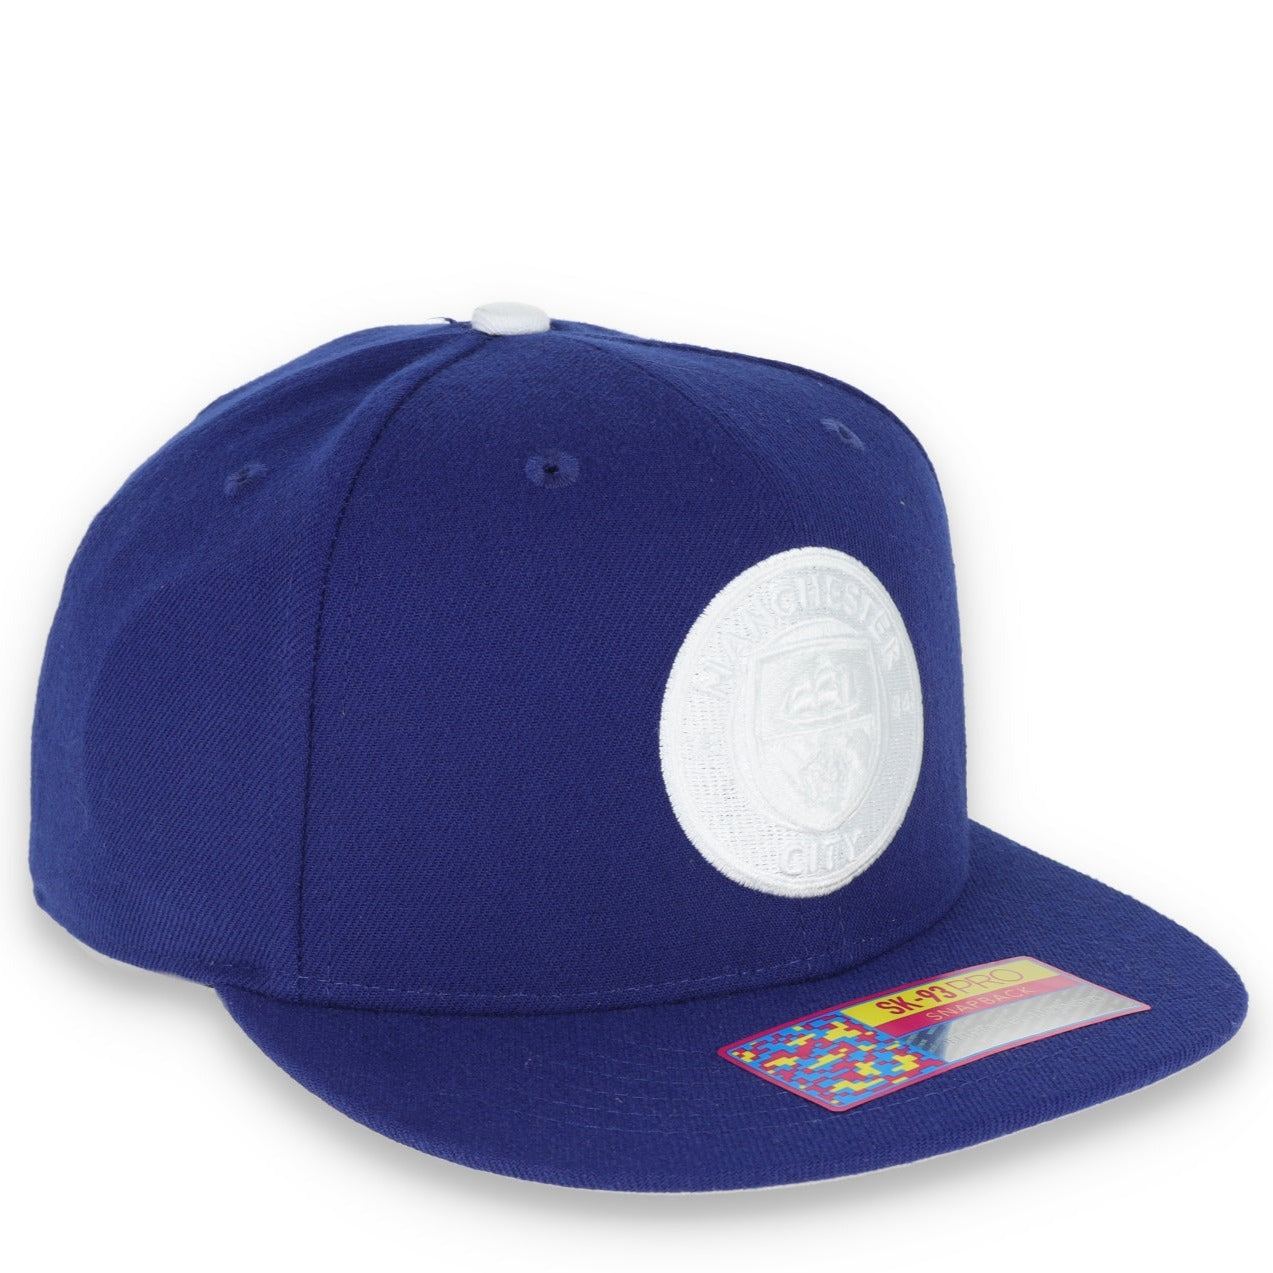 FI MANCHESTER CITY AMERICA'S GAME SNAPBACK HAT